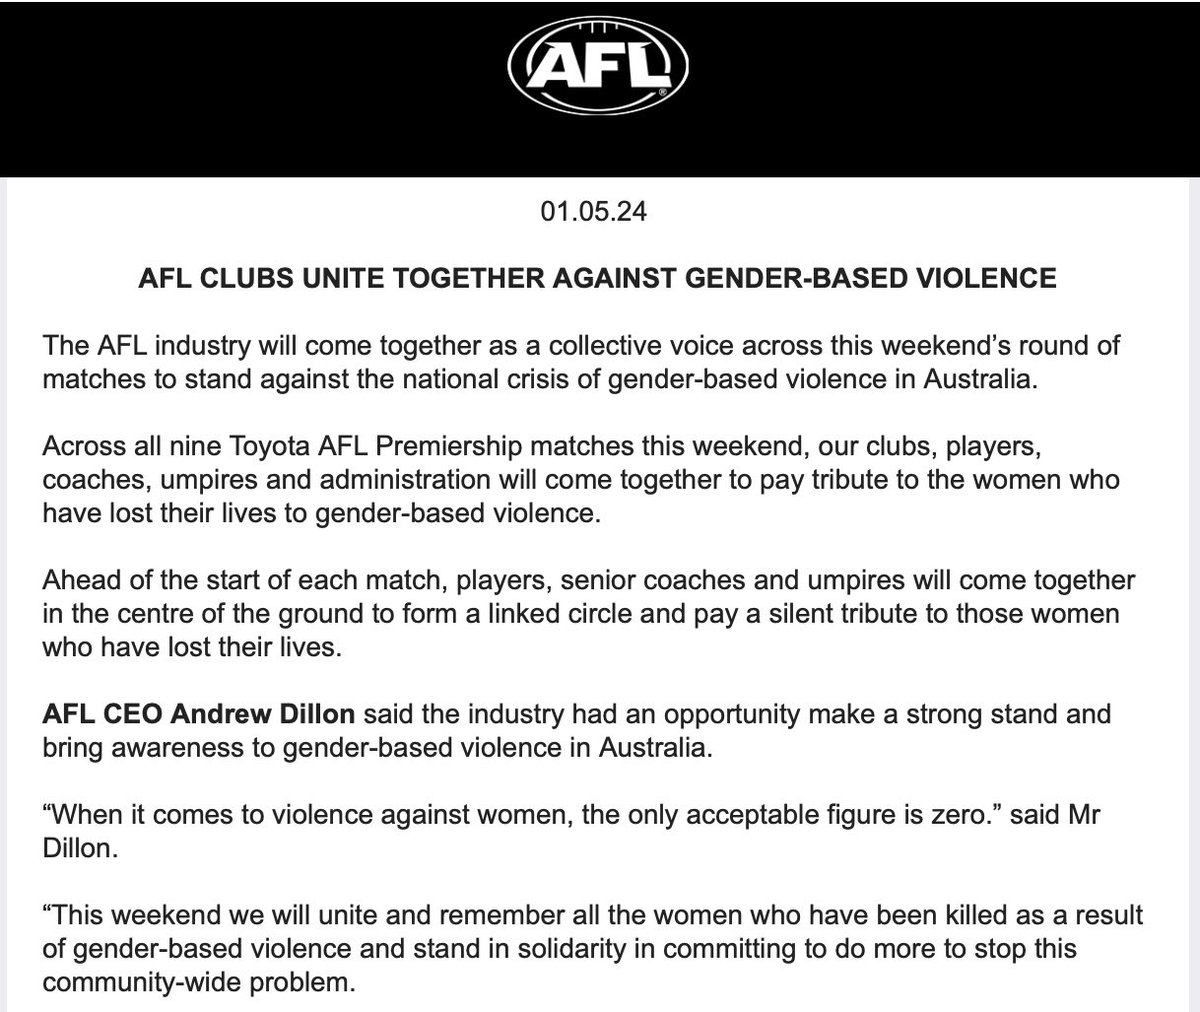 #BREAKING The AFL have released a statement on the gender-based violence in Australia. All players, coaches and umpires will form a circle to pay tribute for women that have died before every game this round | @6NewsAU